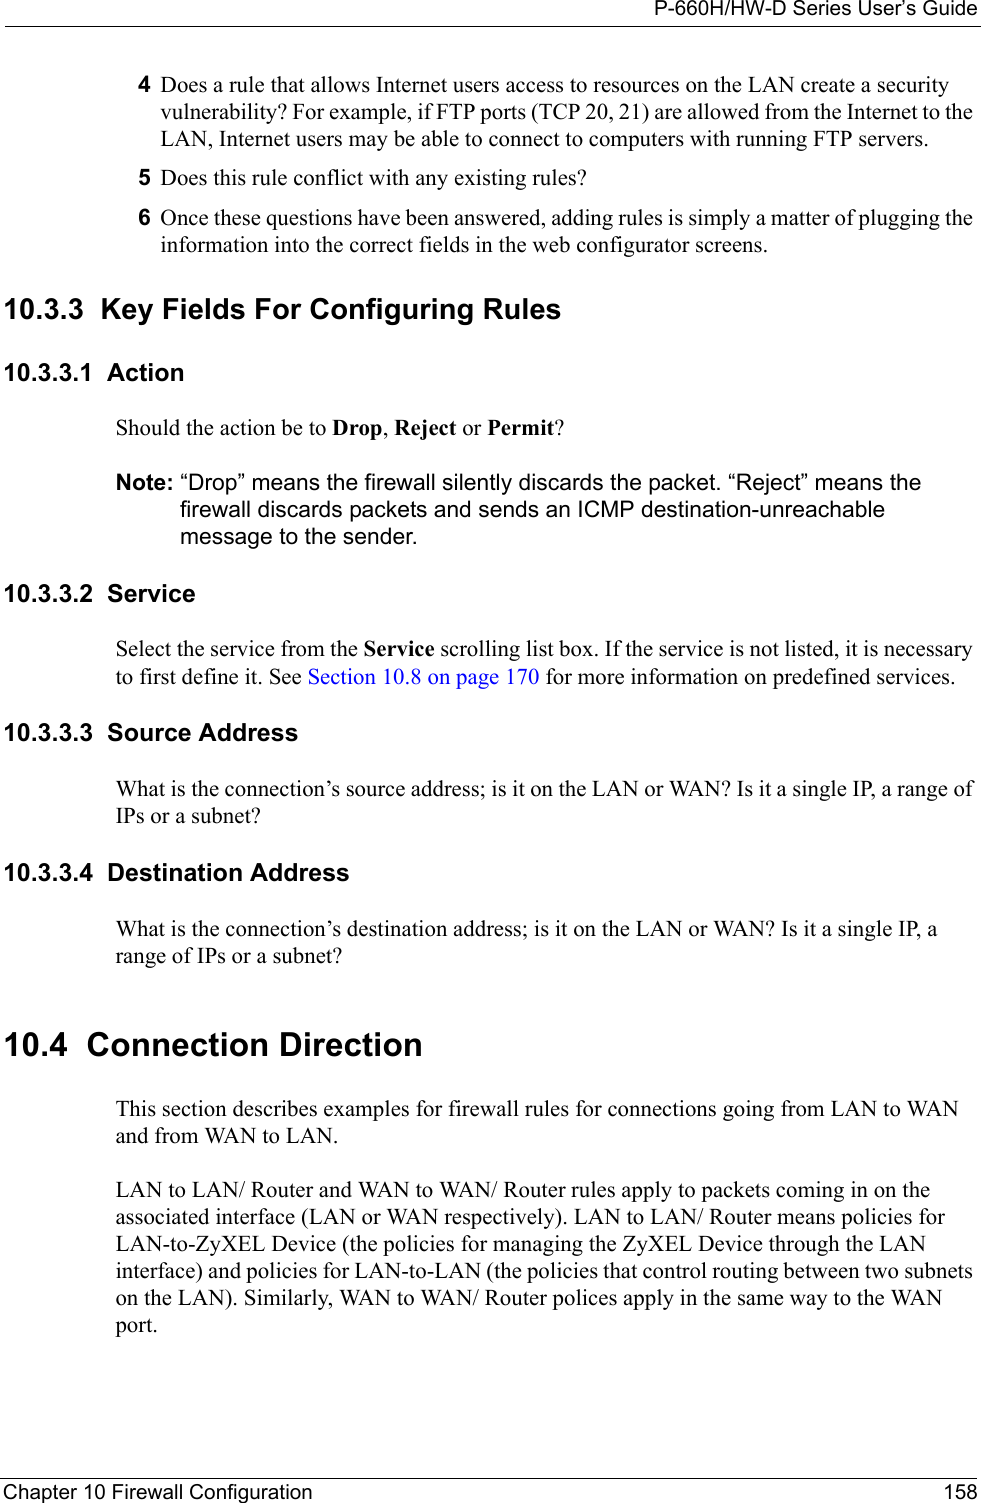 P-660H/HW-D Series User’s GuideChapter 10 Firewall Configuration 1584Does a rule that allows Internet users access to resources on the LAN create a security vulnerability? For example, if FTP ports (TCP 20, 21) are allowed from the Internet to the LAN, Internet users may be able to connect to computers with running FTP servers.5Does this rule conflict with any existing rules?6Once these questions have been answered, adding rules is simply a matter of plugging the information into the correct fields in the web configurator screens.10.3.3  Key Fields For Configuring Rules10.3.3.1  ActionShould the action be to Drop, Reject or Permit? Note: “Drop” means the firewall silently discards the packet. “Reject” means the firewall discards packets and sends an ICMP destination-unreachable message to the sender.10.3.3.2  ServiceSelect the service from the Service scrolling list box. If the service is not listed, it is necessary to first define it. See Section 10.8 on page 170 for more information on predefined services.10.3.3.3  Source AddressWhat is the connection’s source address; is it on the LAN or WAN? Is it a single IP, a range of IPs or a subnet?10.3.3.4  Destination AddressWhat is the connection’s destination address; is it on the LAN or WAN? Is it a single IP, a range of IPs or a subnet?10.4  Connection DirectionThis section describes examples for firewall rules for connections going from LAN to WAN and from WAN to LAN.LAN to LAN/ Router and WAN to WAN/ Router rules apply to packets coming in on the associated interface (LAN or WAN respectively). LAN to LAN/ Router means policies for LAN-to-ZyXEL Device (the policies for managing the ZyXEL Device through the LAN interface) and policies for LAN-to-LAN (the policies that control routing between two subnets on the LAN). Similarly, WAN to WAN/ Router polices apply in the same way to the WAN port.